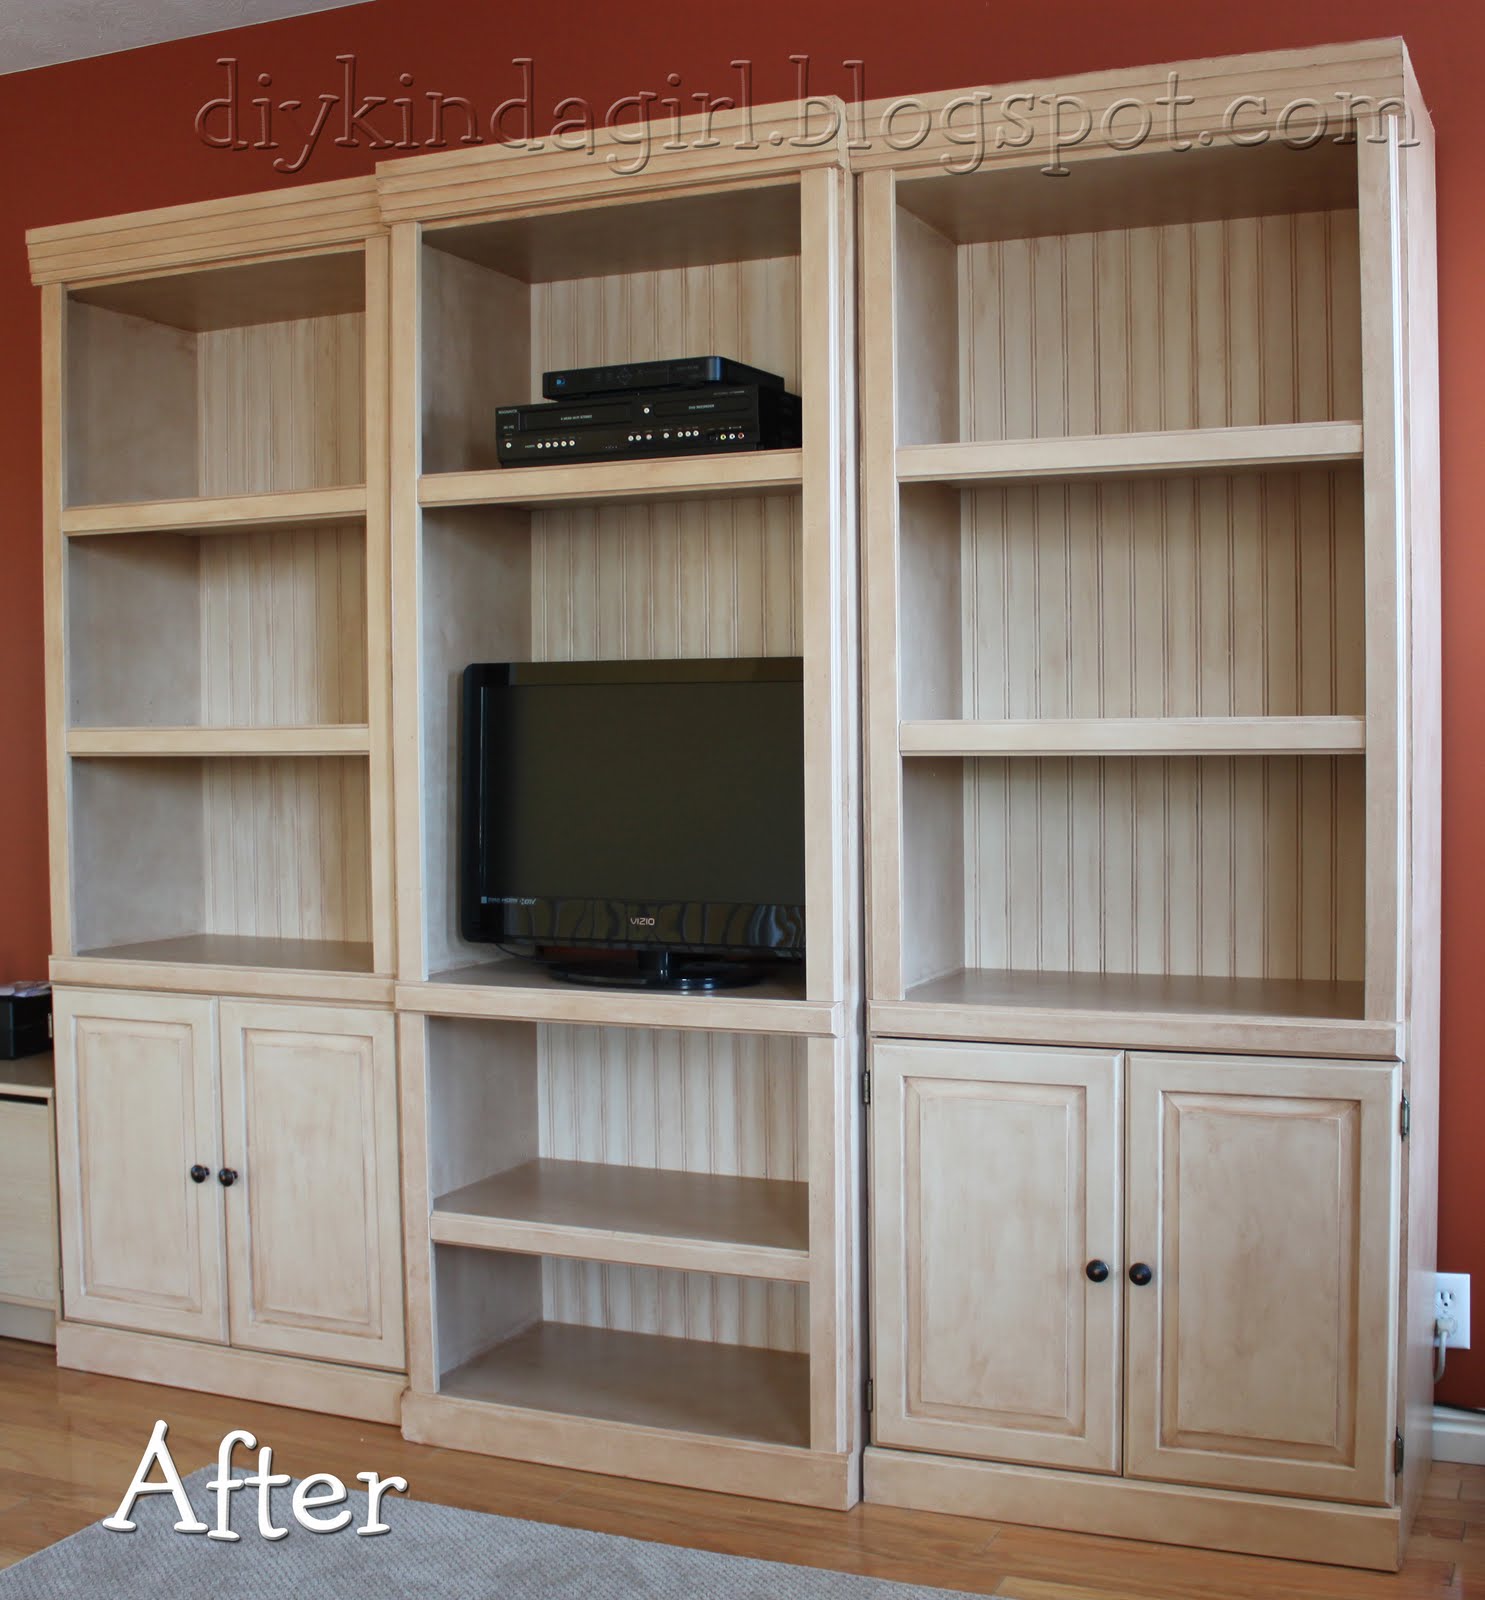 Painting Laminate Cabinets Before And After Pictures